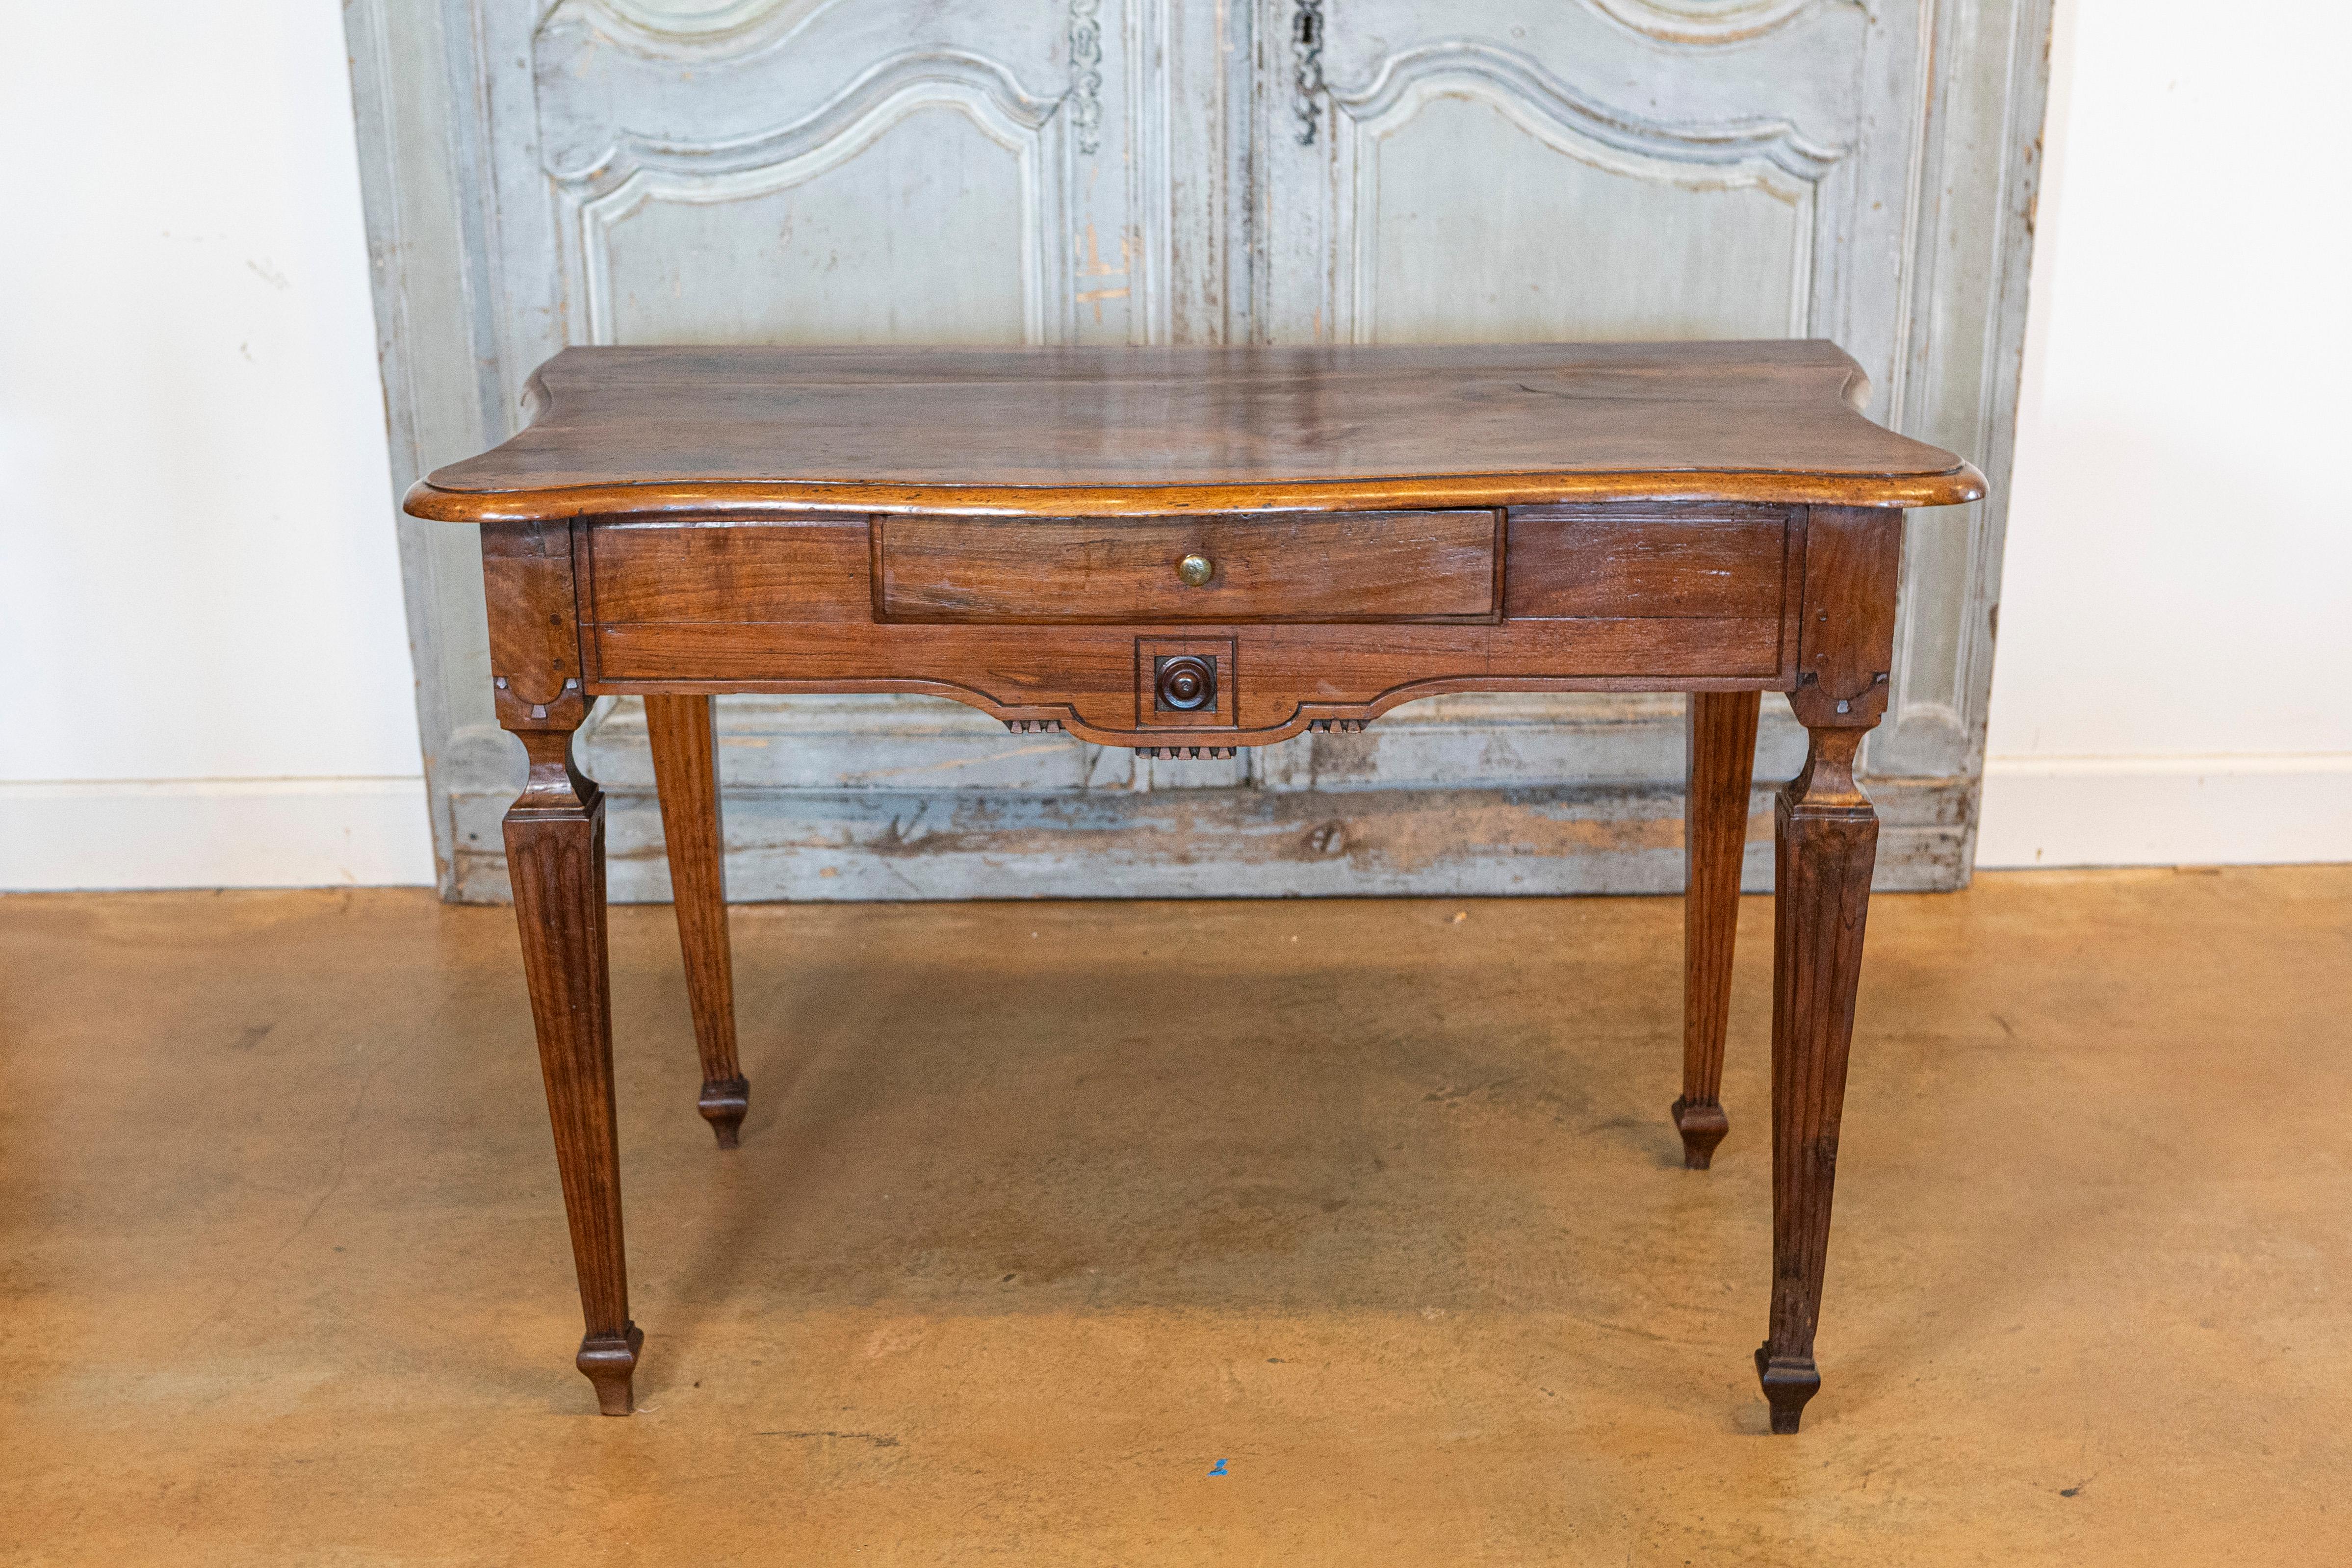 An Italian walnut console table from the 18th century with serpentine top, single drawer, carved apron and tapered legs. Emanate the grandeur of 18th-century Italian artistry with this sumptuous walnut console table. The eye is instantly drawn to